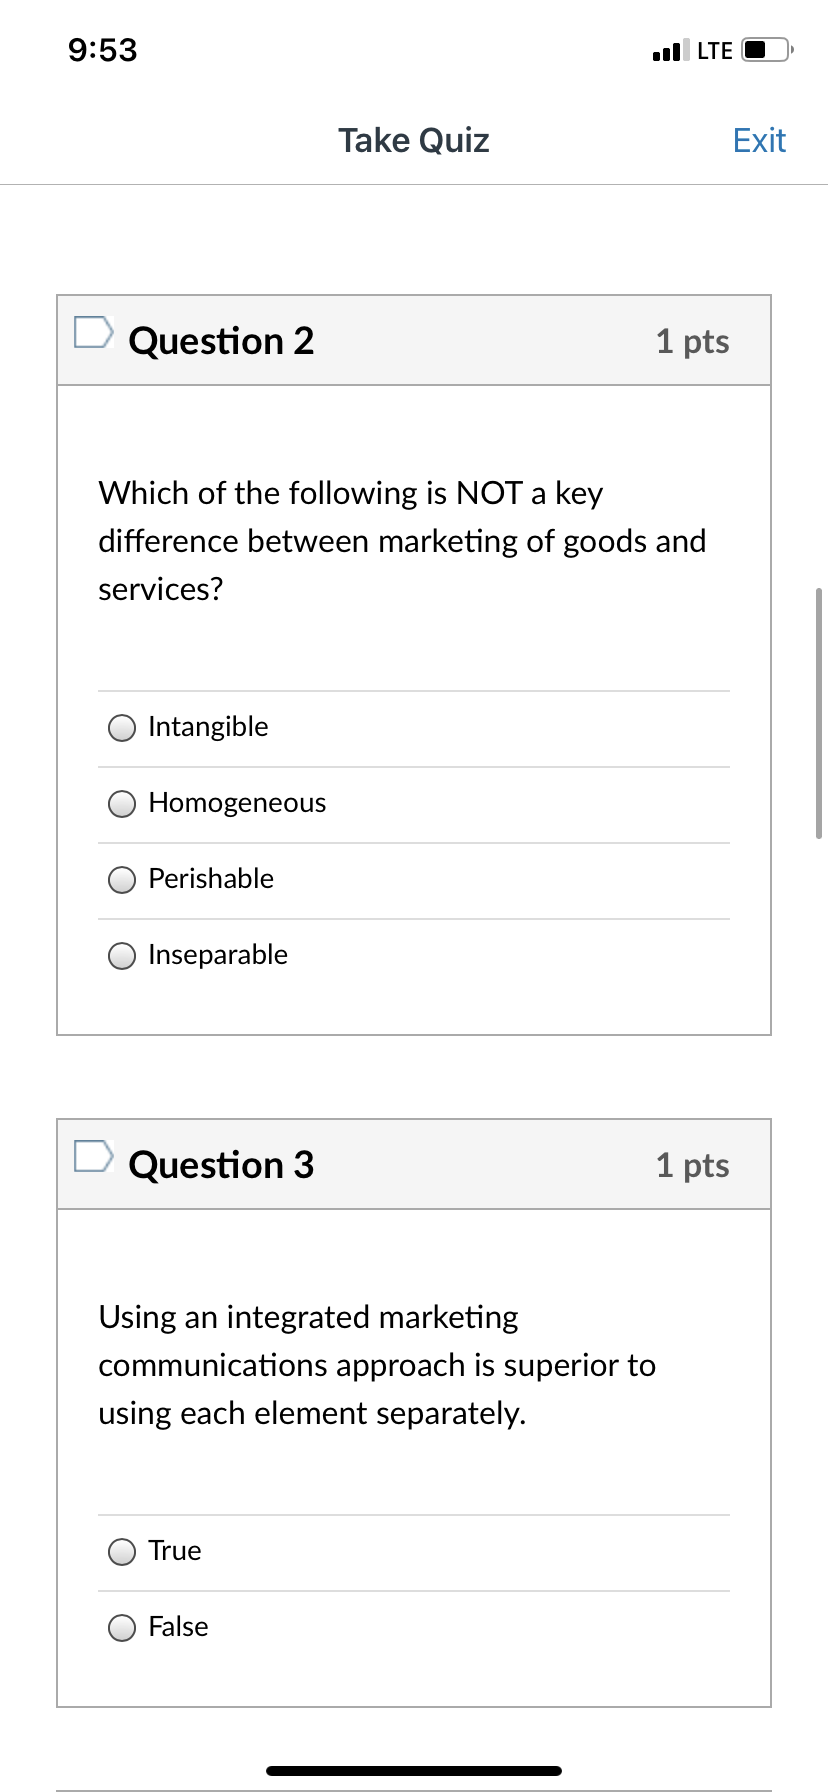 9:53
ul LTE
Take Quiz
Exit
D Question 2
1 pts
Which of the following is NOT a key
difference between marketing of goods and
services?
Intangible
Homogeneous
Perishable
Inseparable
Question 3
1 pts
Using an integrated marketing
communications approach is superior to
using each element separately.
True
False
